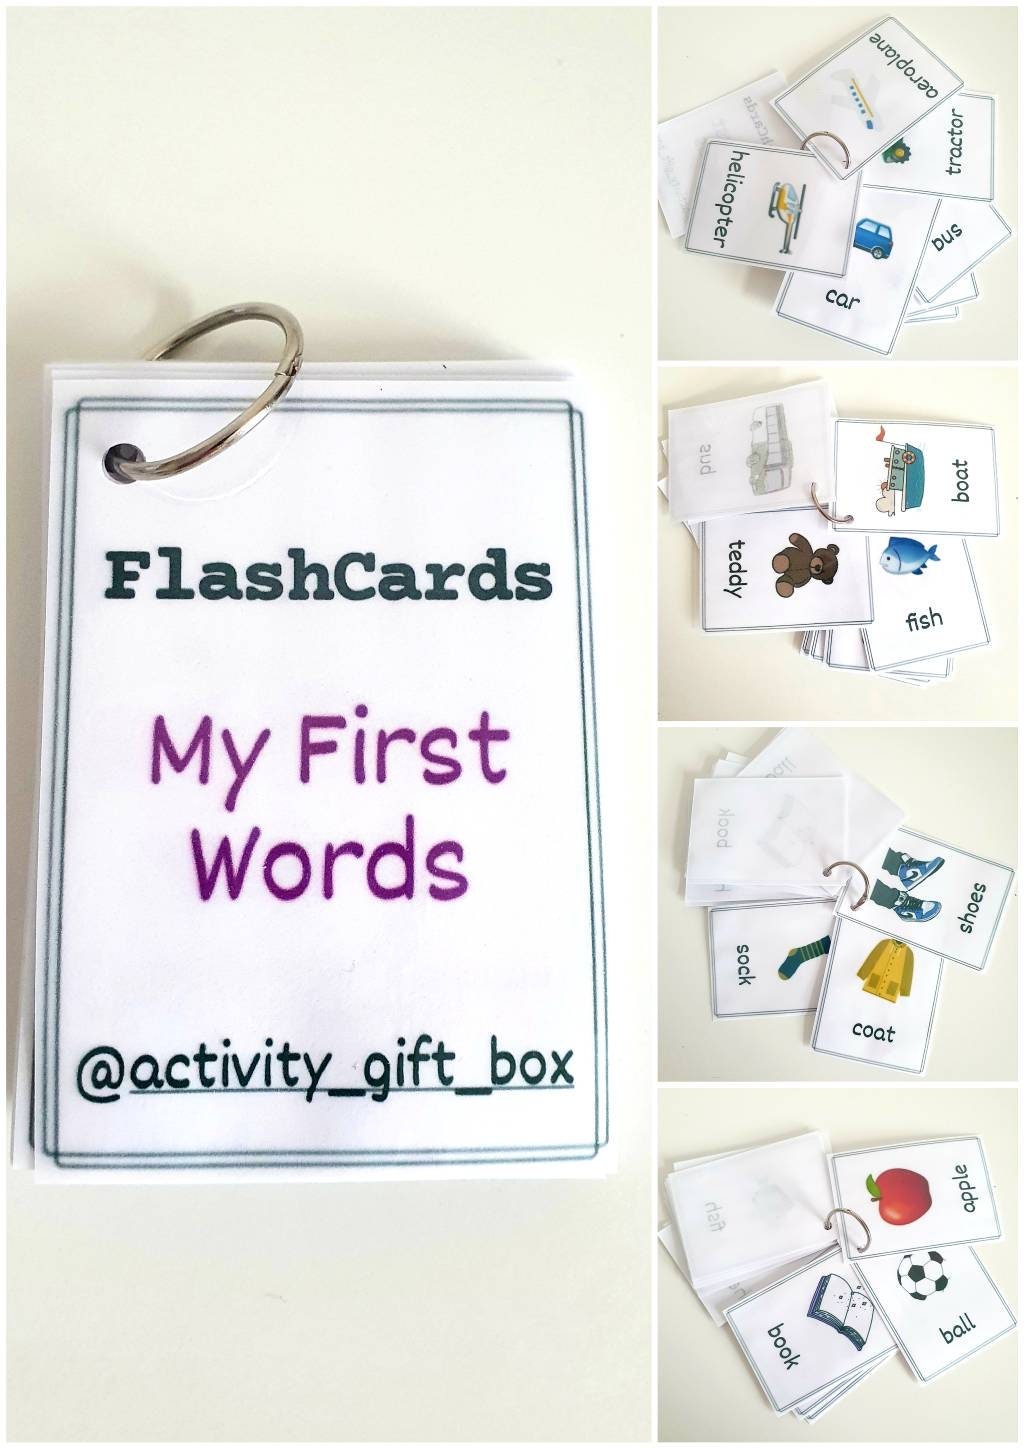 FIRST WORDS FLASH CARDS- Picture & Word - Toddler - Baby - First Learning  Set